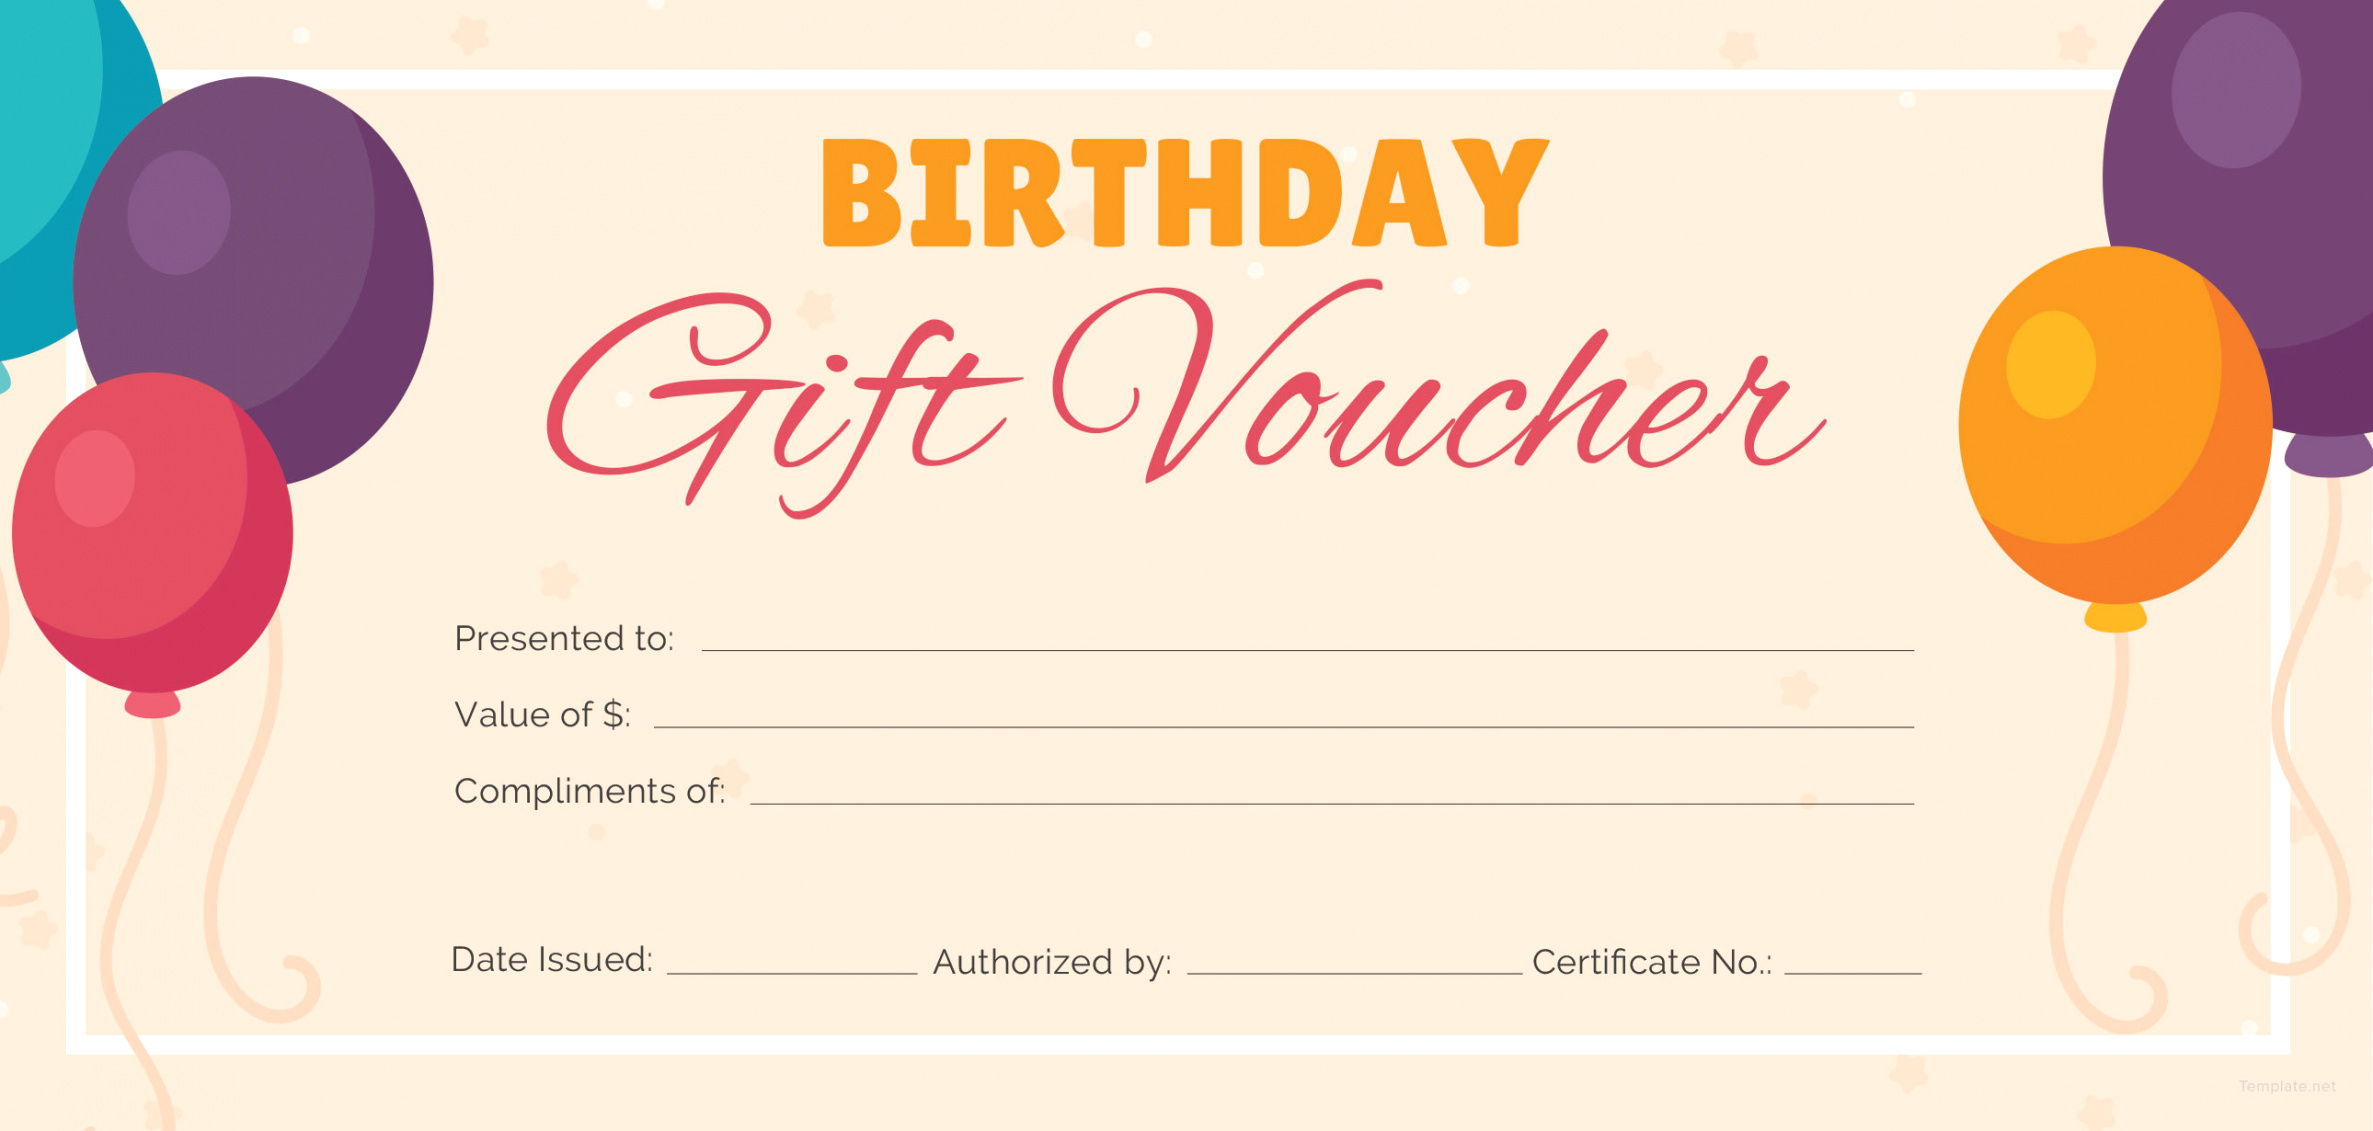 Free Birthday Gift Certificate Templates Certificate Regarding Graduation Gift Certificate Template Free